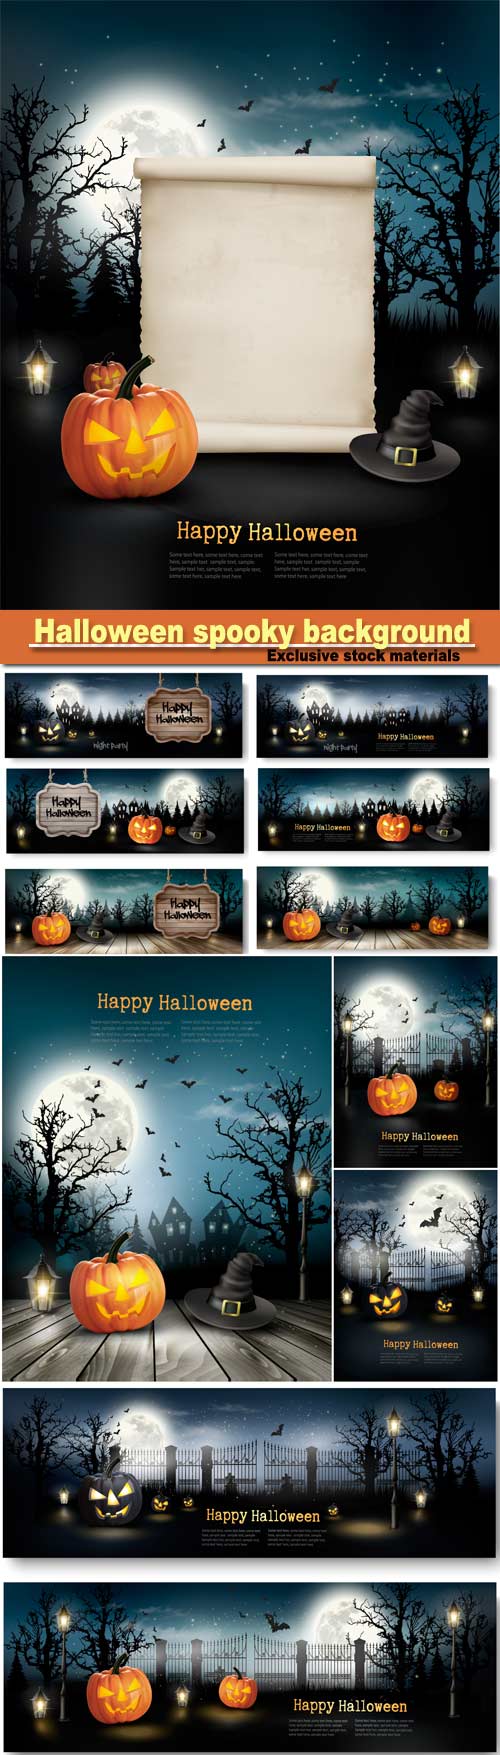 Halloween spooky background, holiday halloween banners with pumpkins